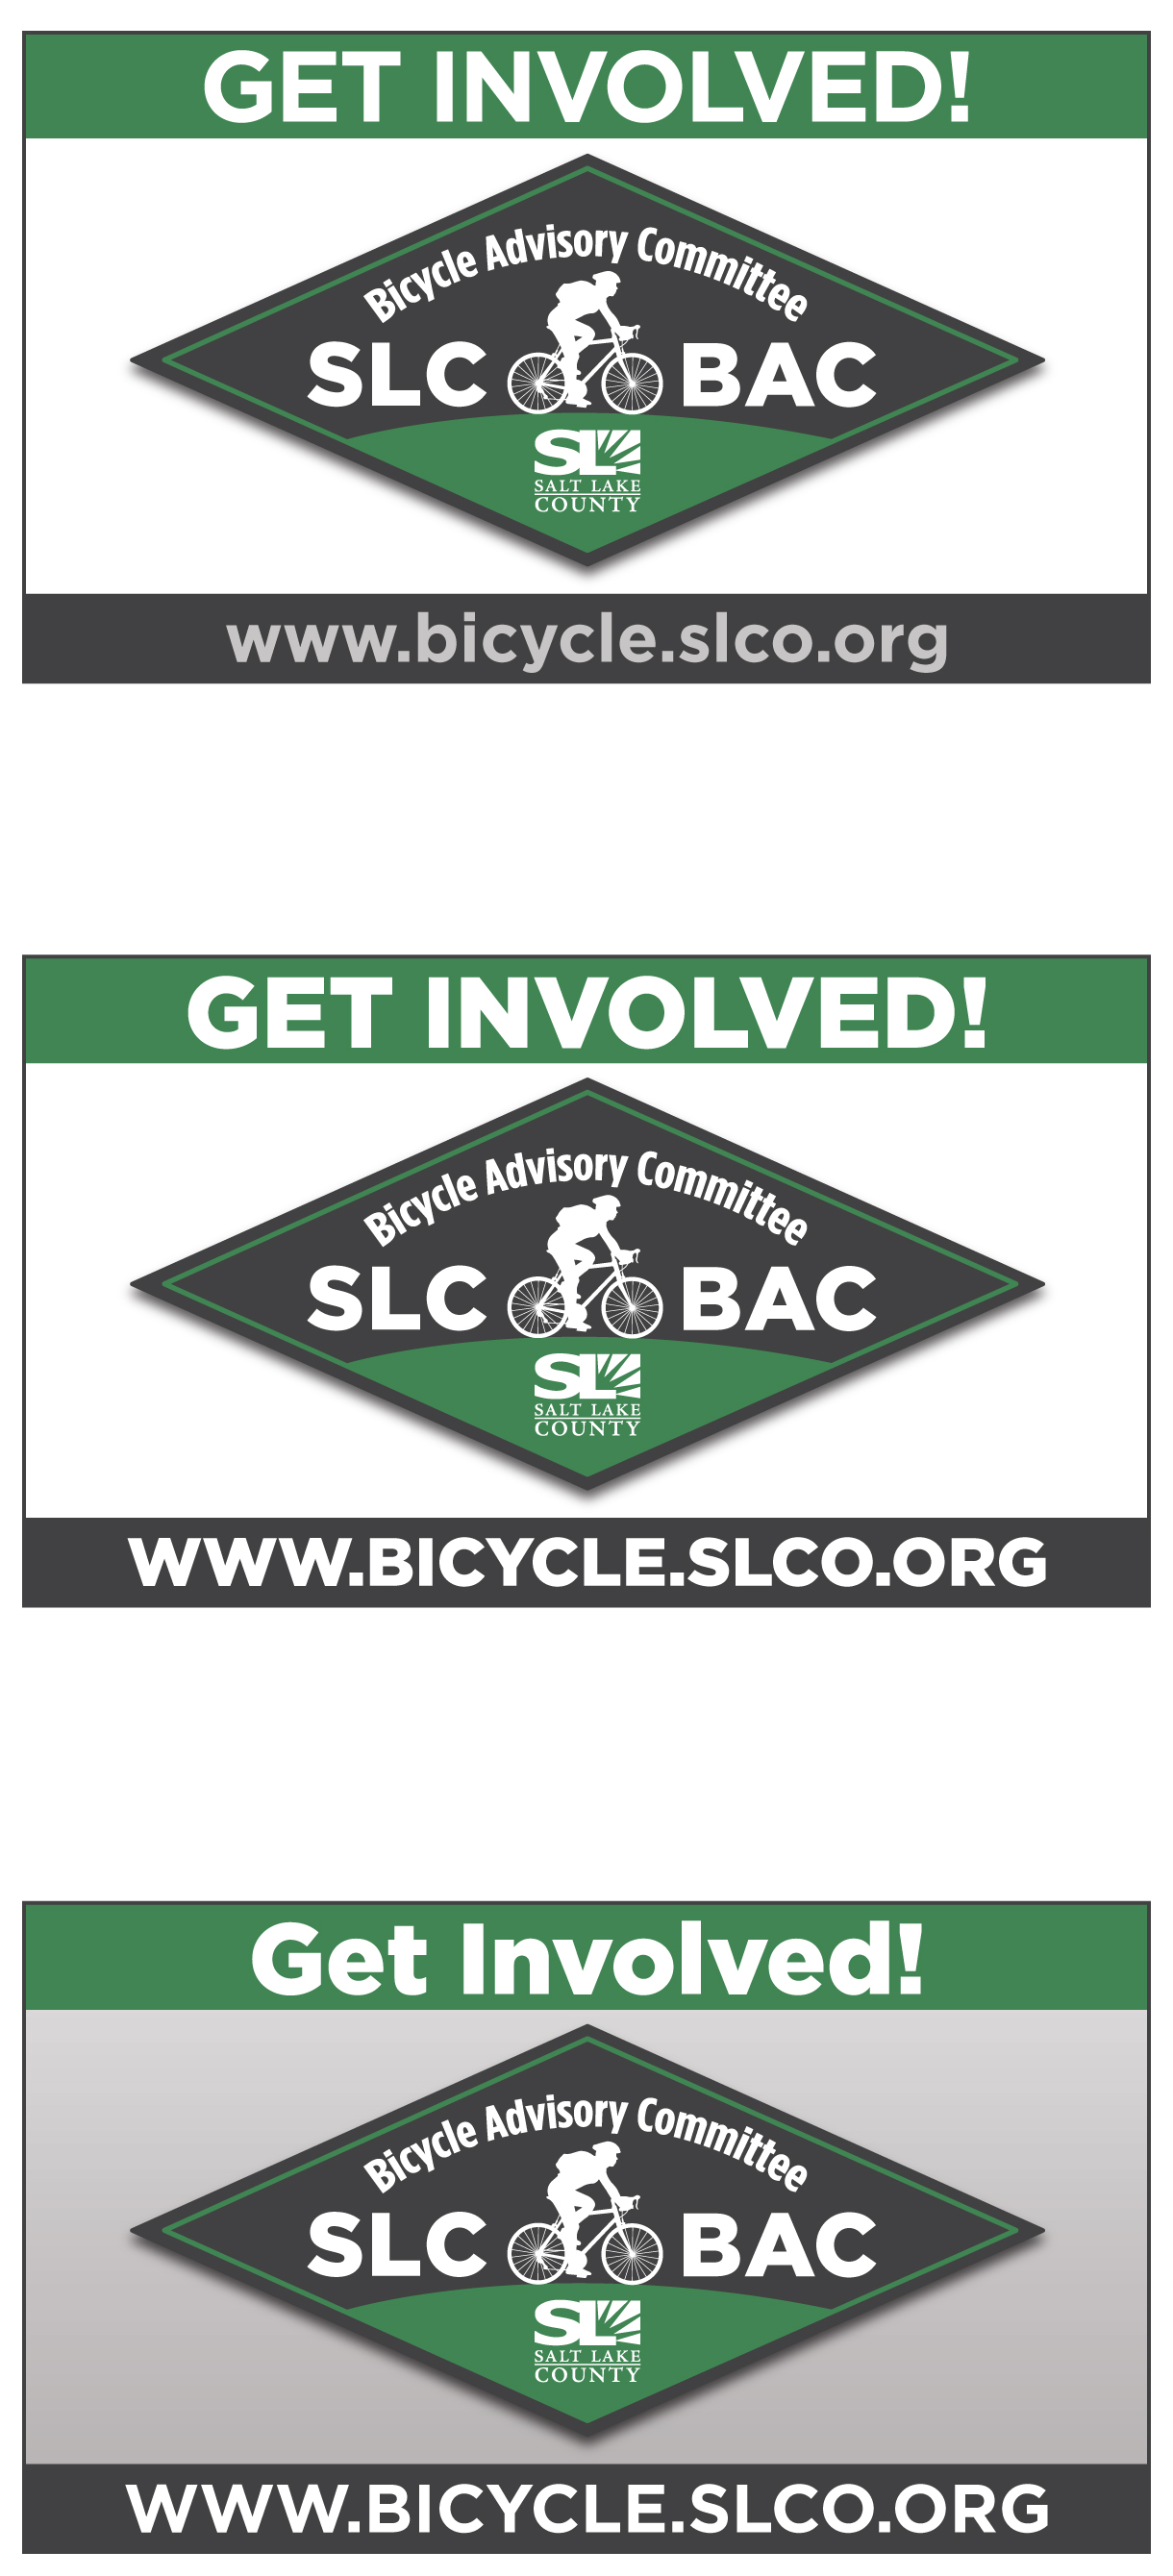 Salt Lake County Bicycle Advisory Committee News for May 2016